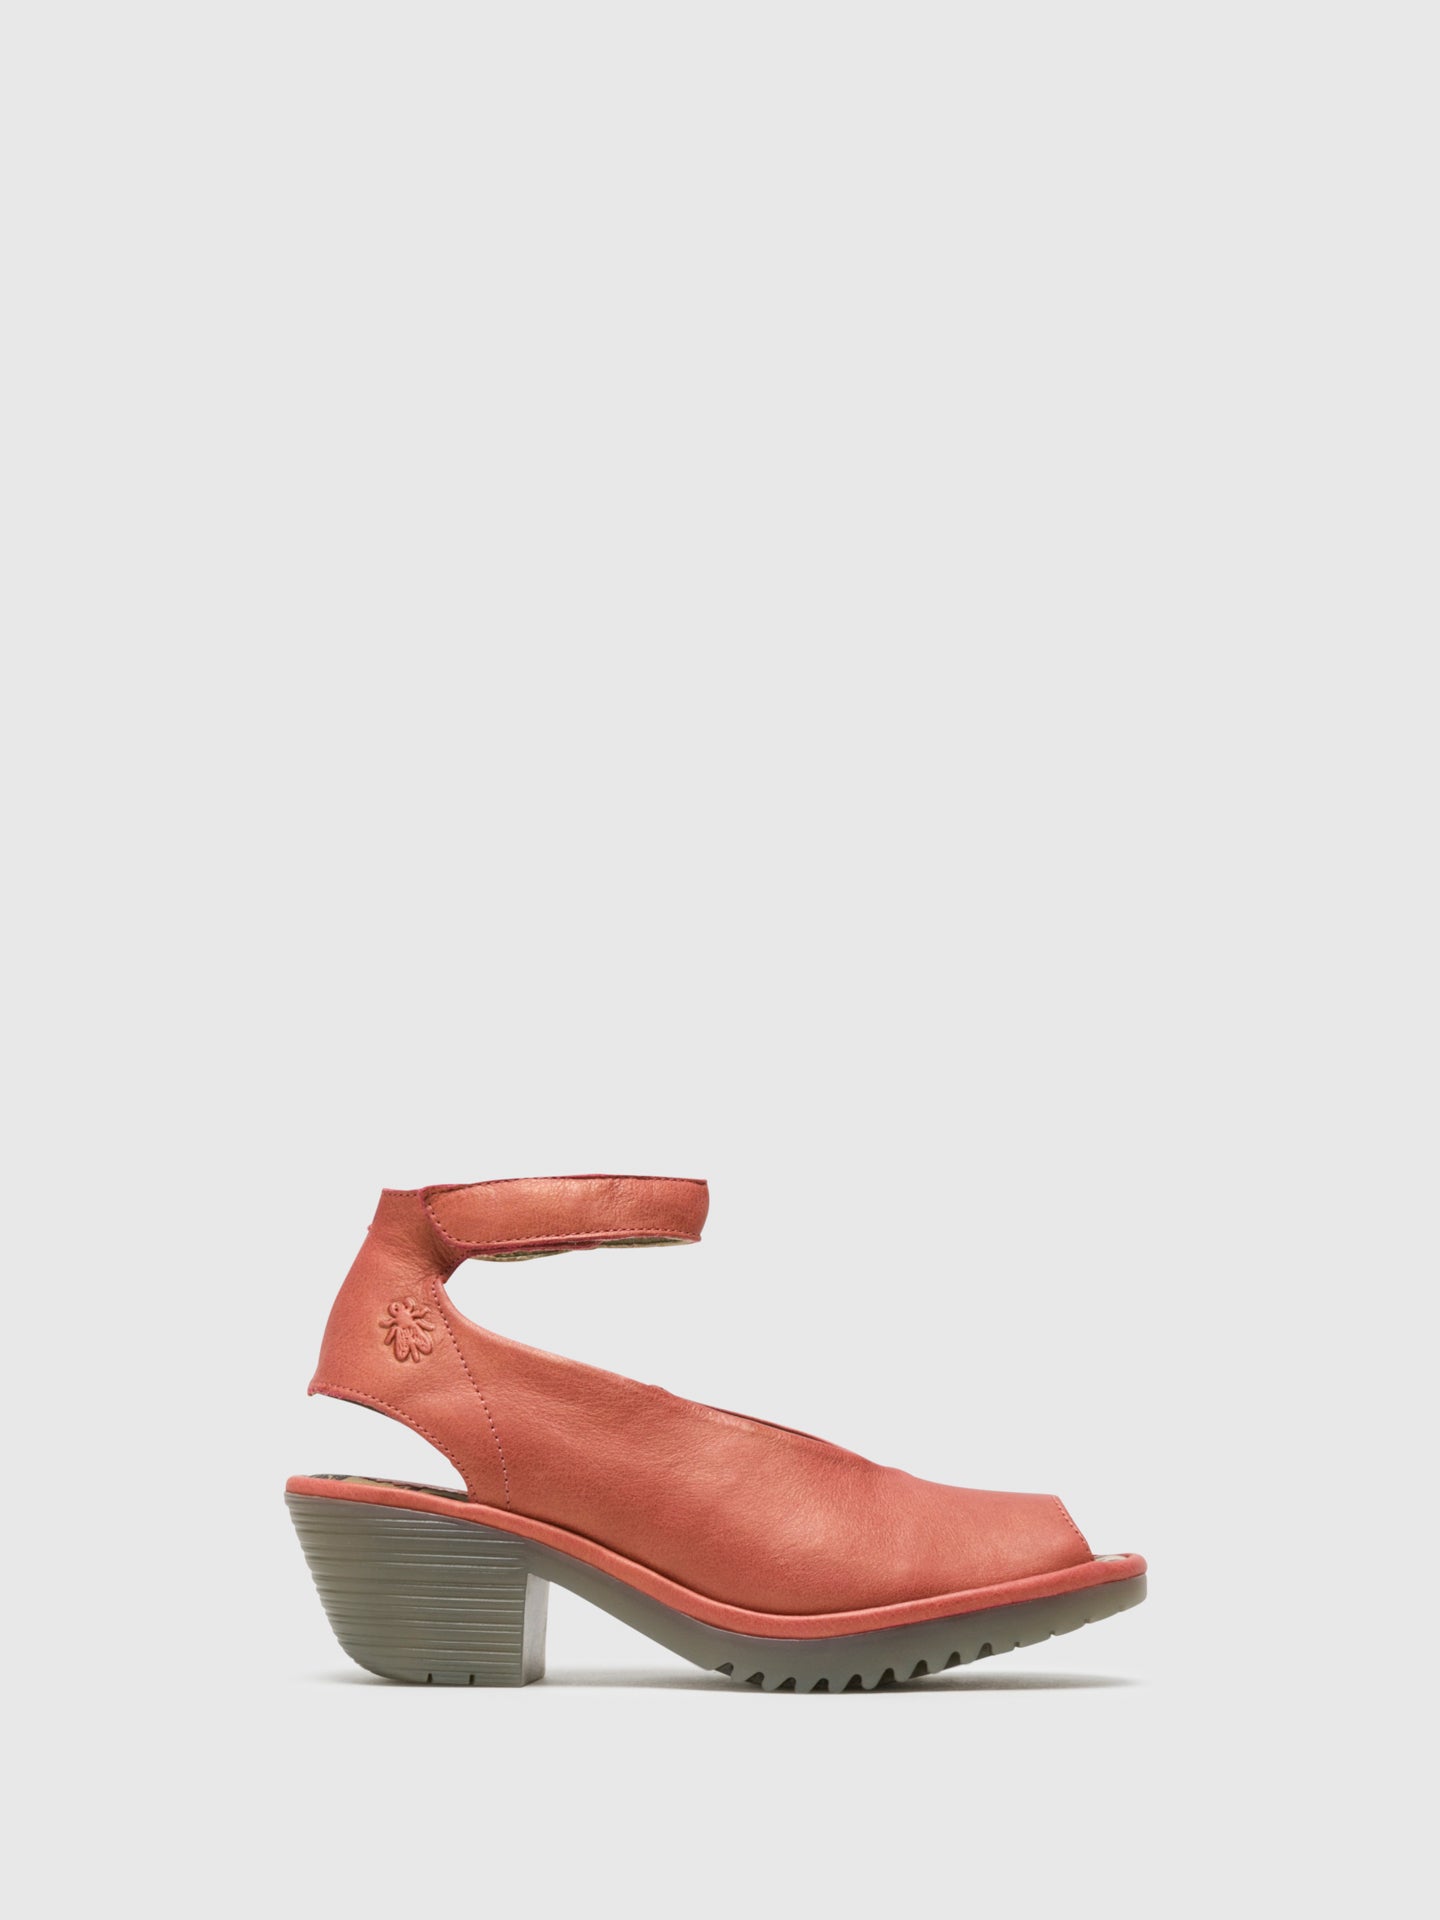 Fly London Pink Ankle Strap Sandals